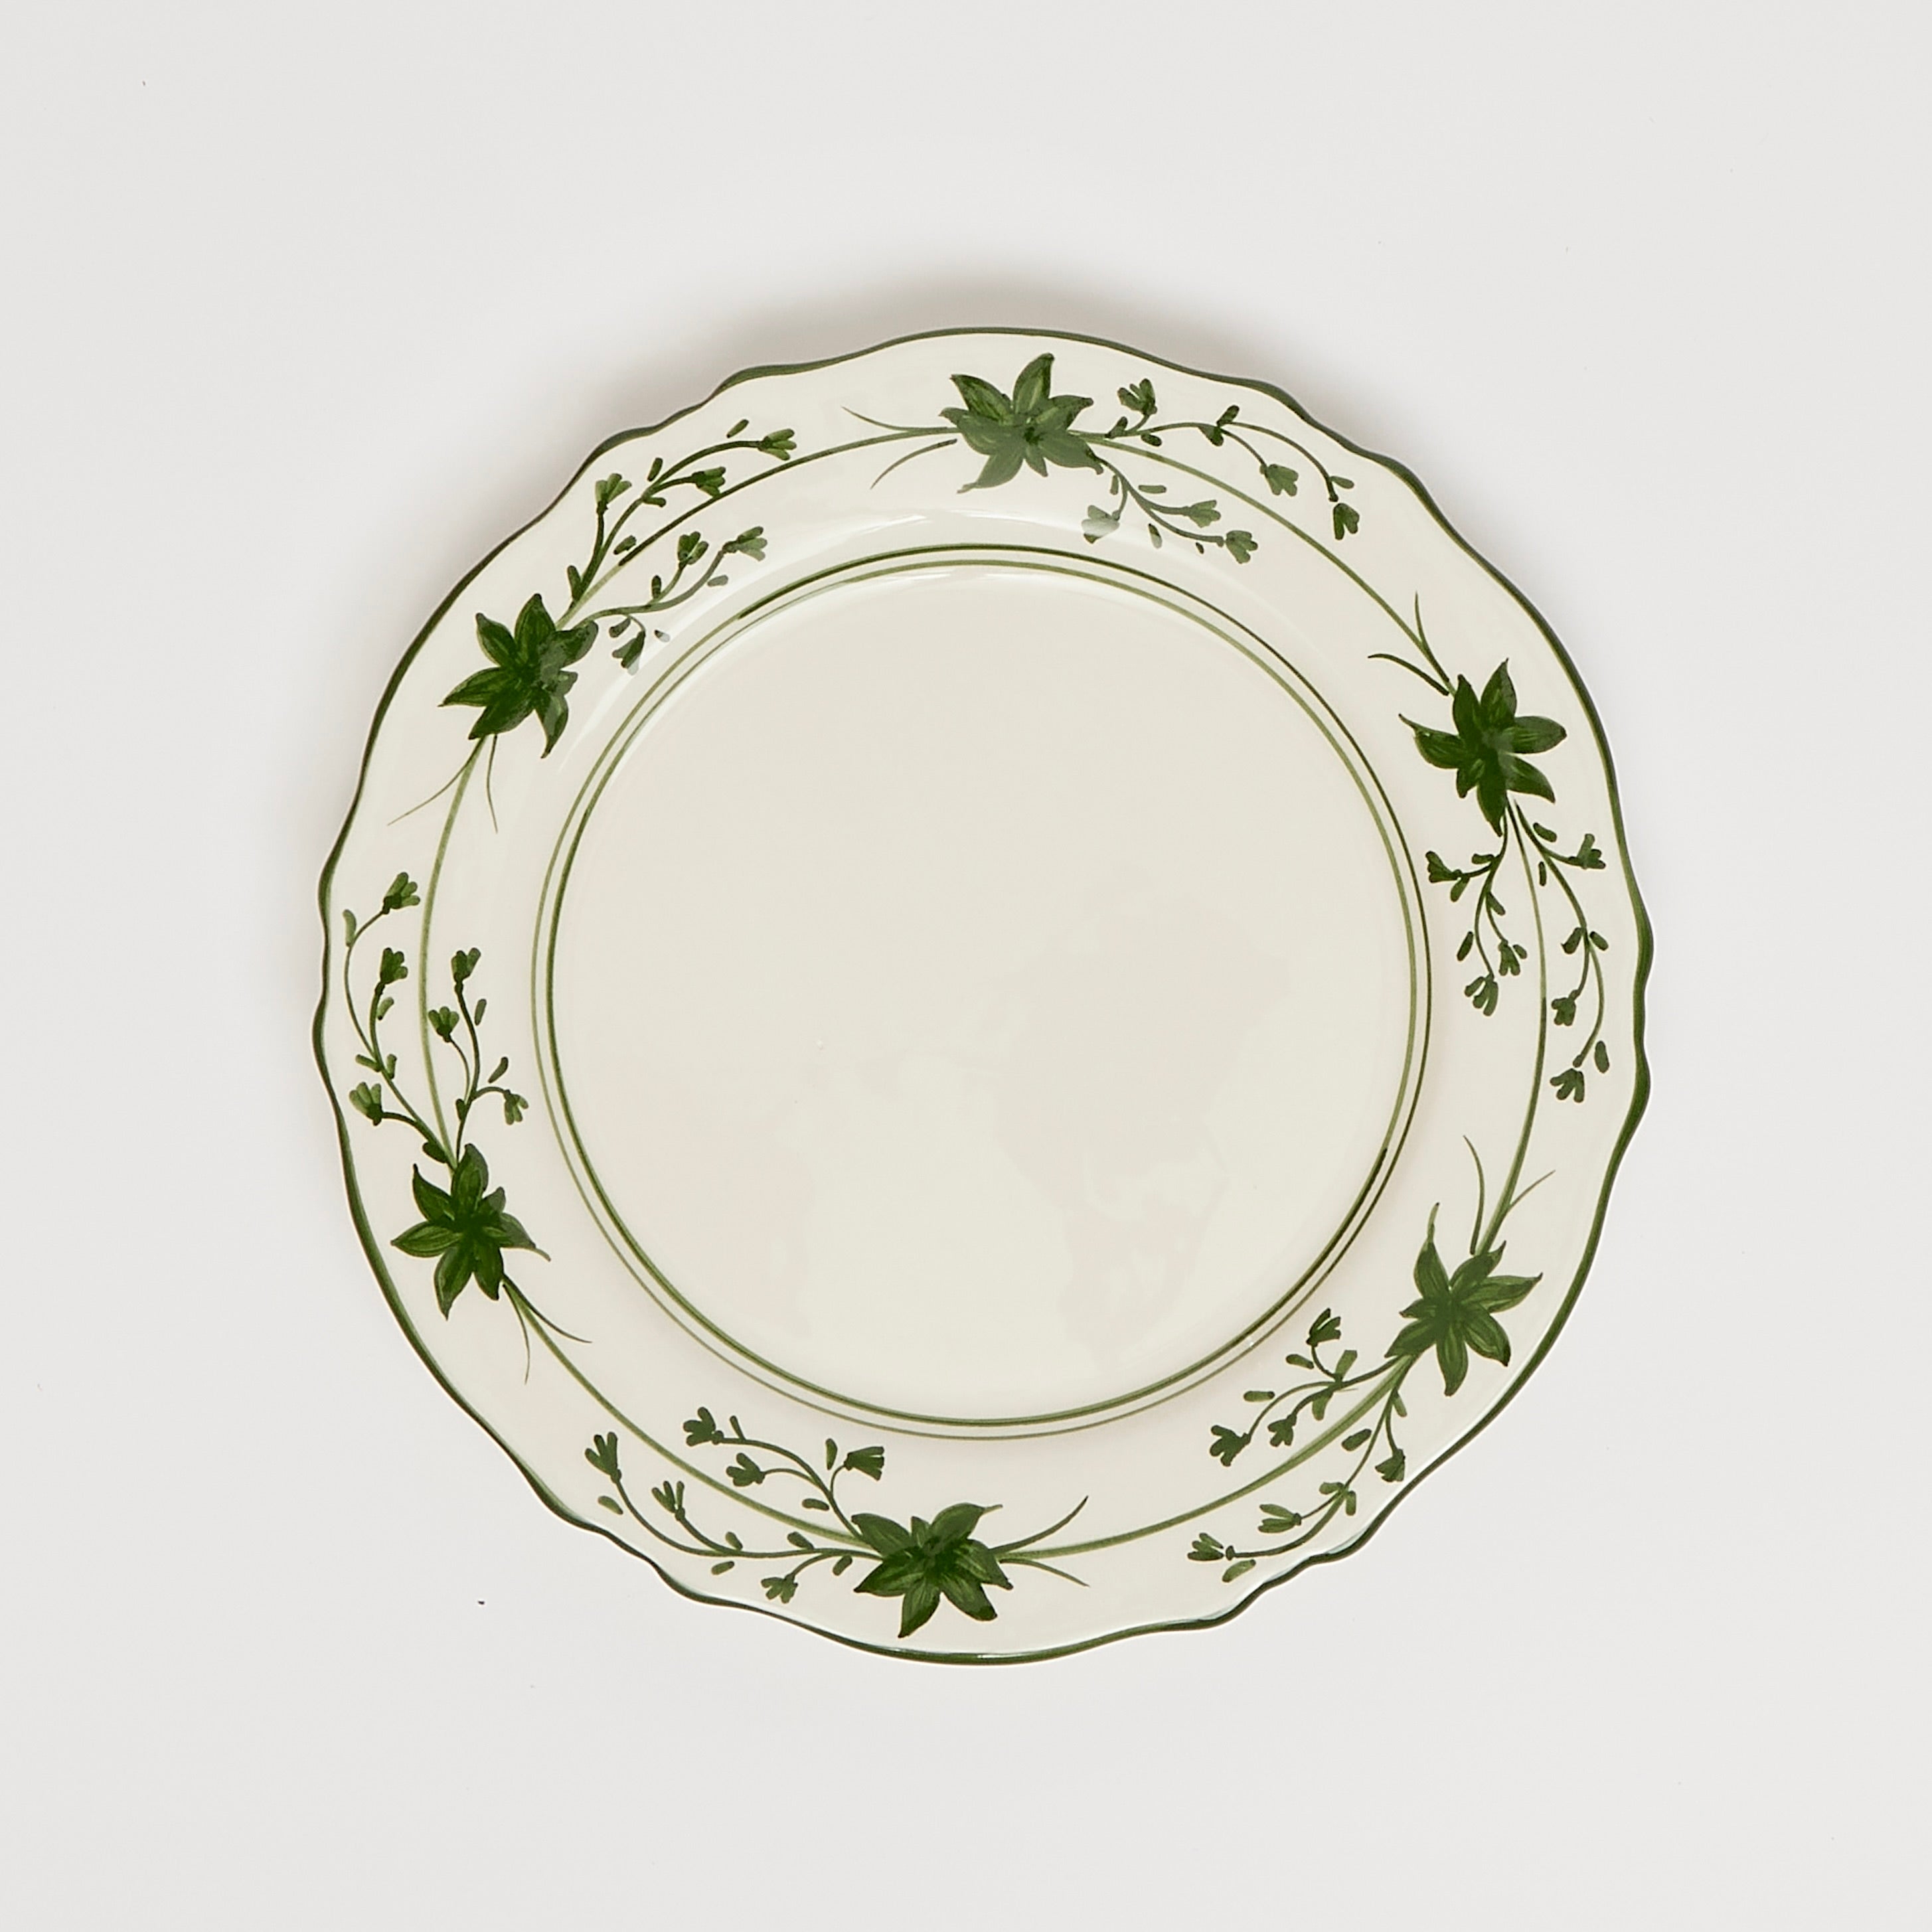 Hand Painted Green Lyla Dinner Plates (set of 4)